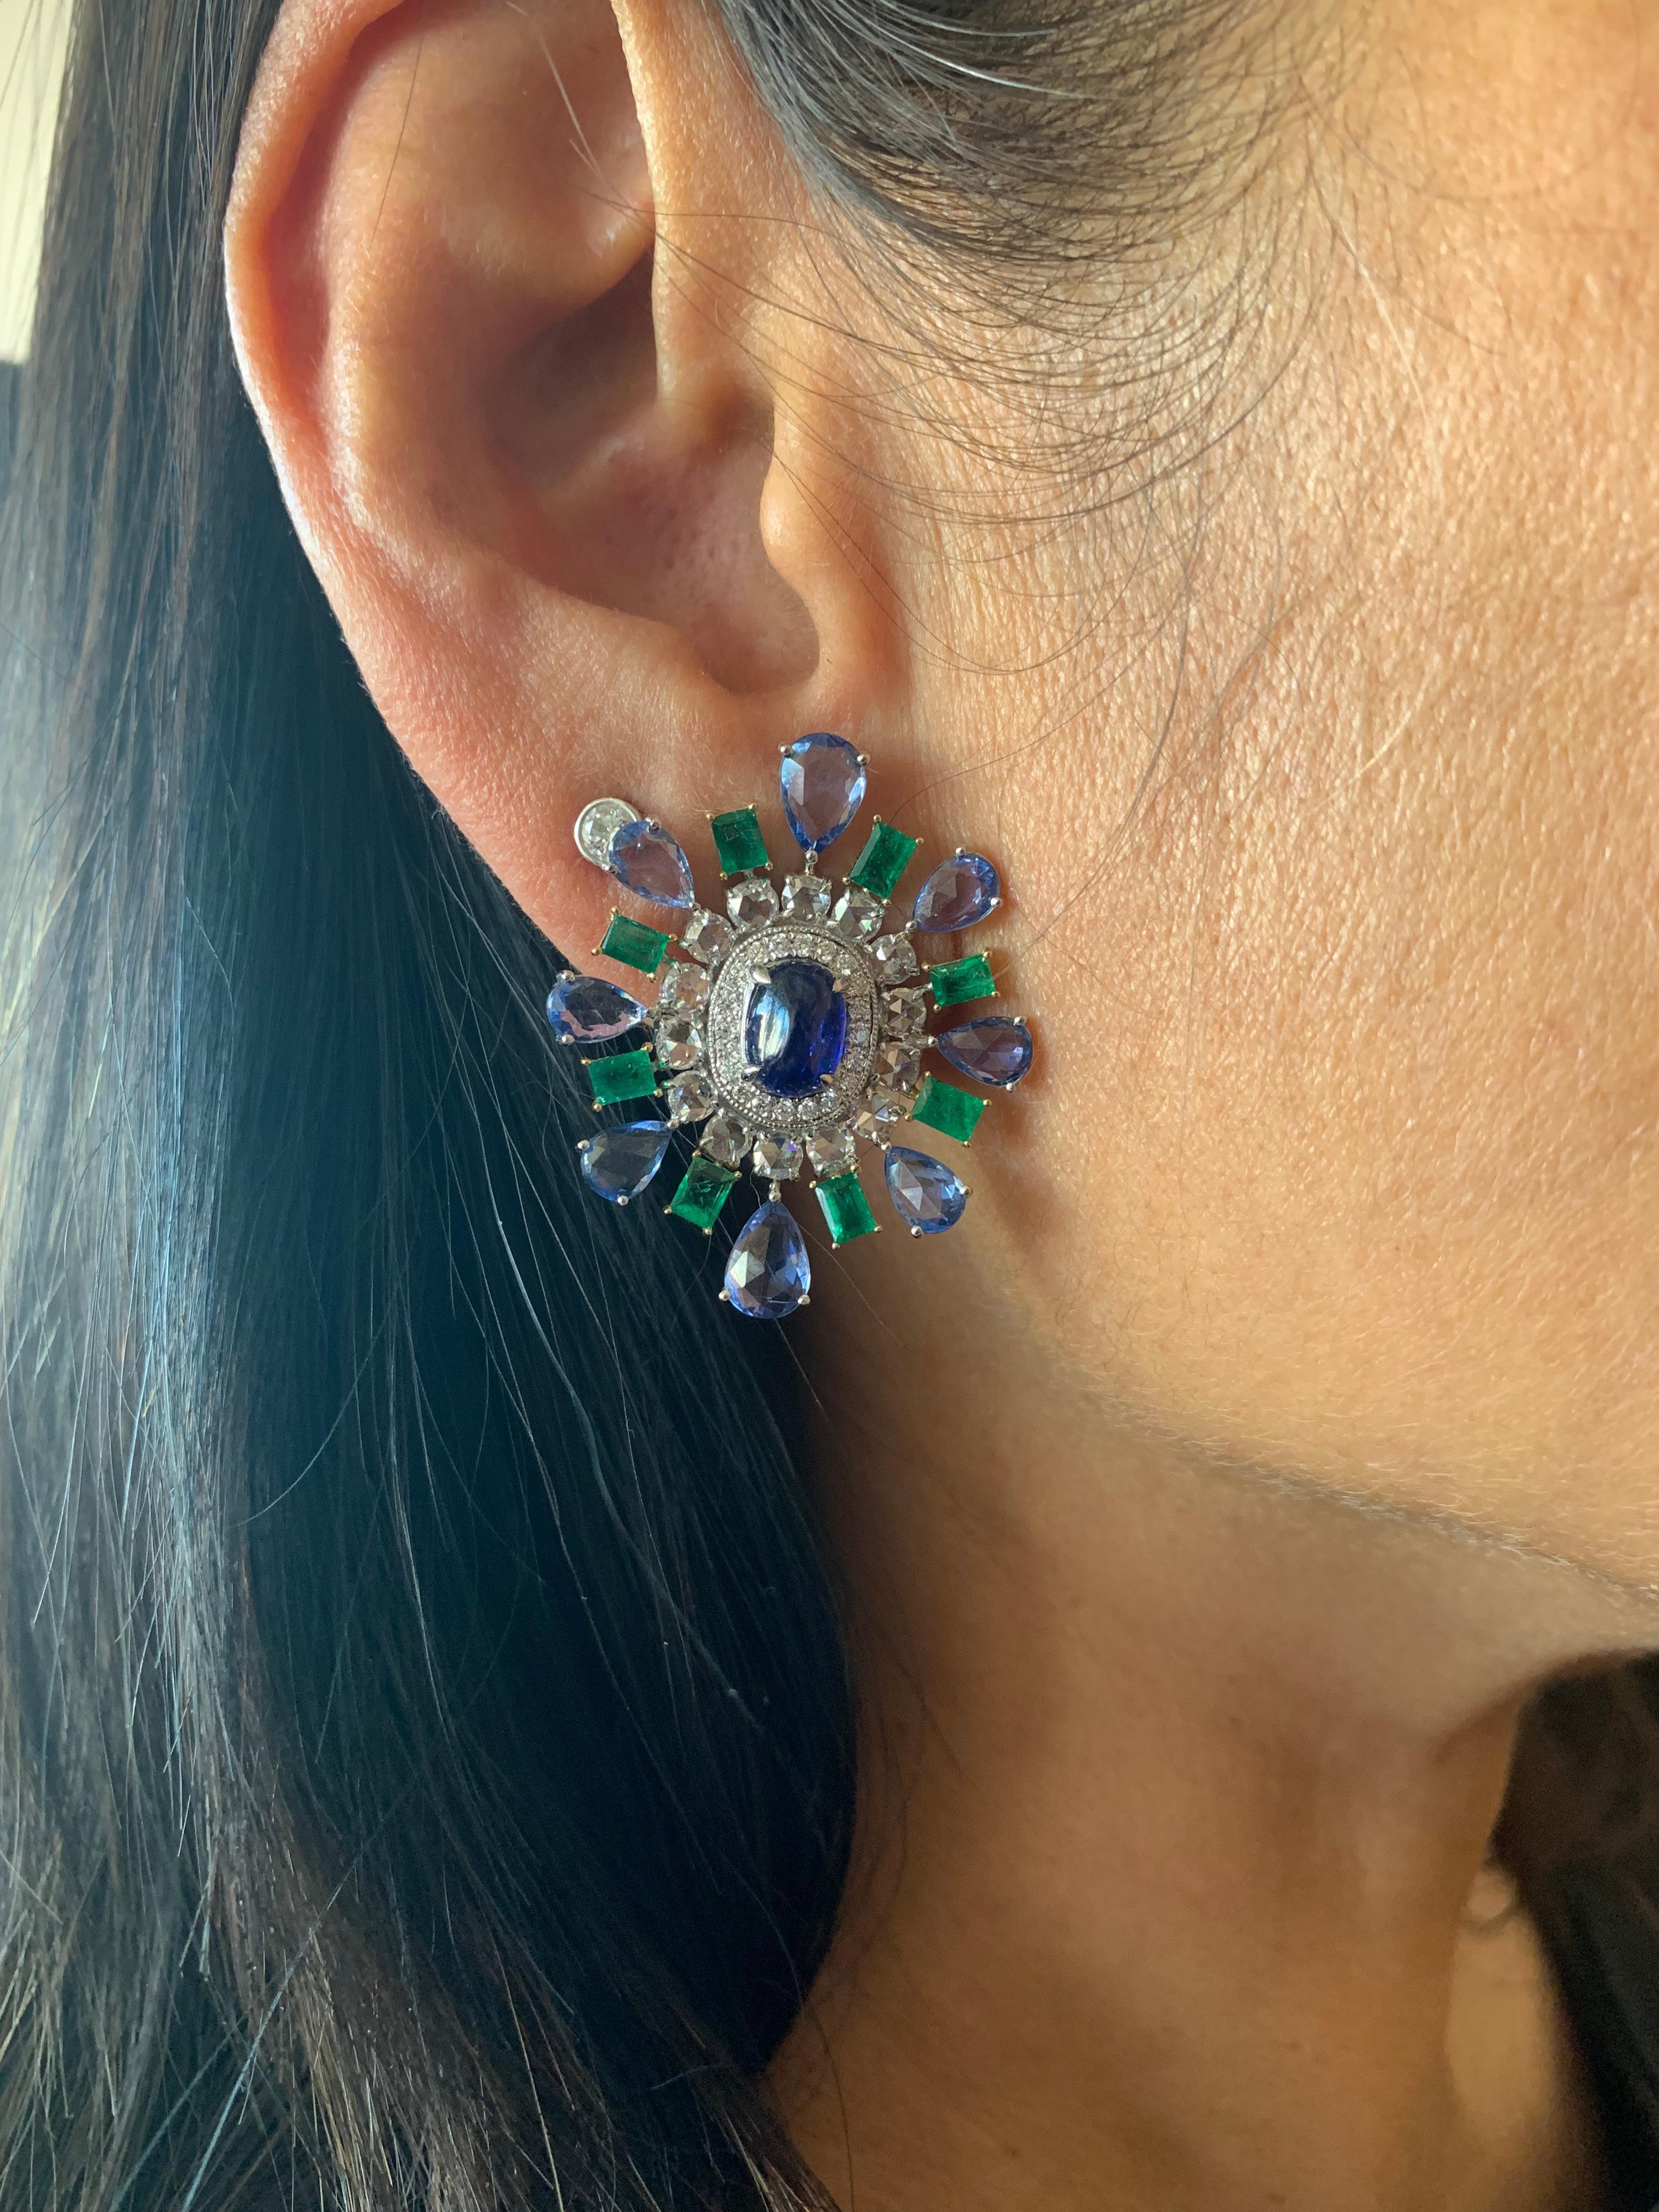 Elegant blue sapphire and emerald stud earrings that are fun to wear. Crafted using a mix of unique cuts and shapes, these earrings are inspired by art deco and mughal elements. The pop of color with a trendy design makes these an eye-catching pair